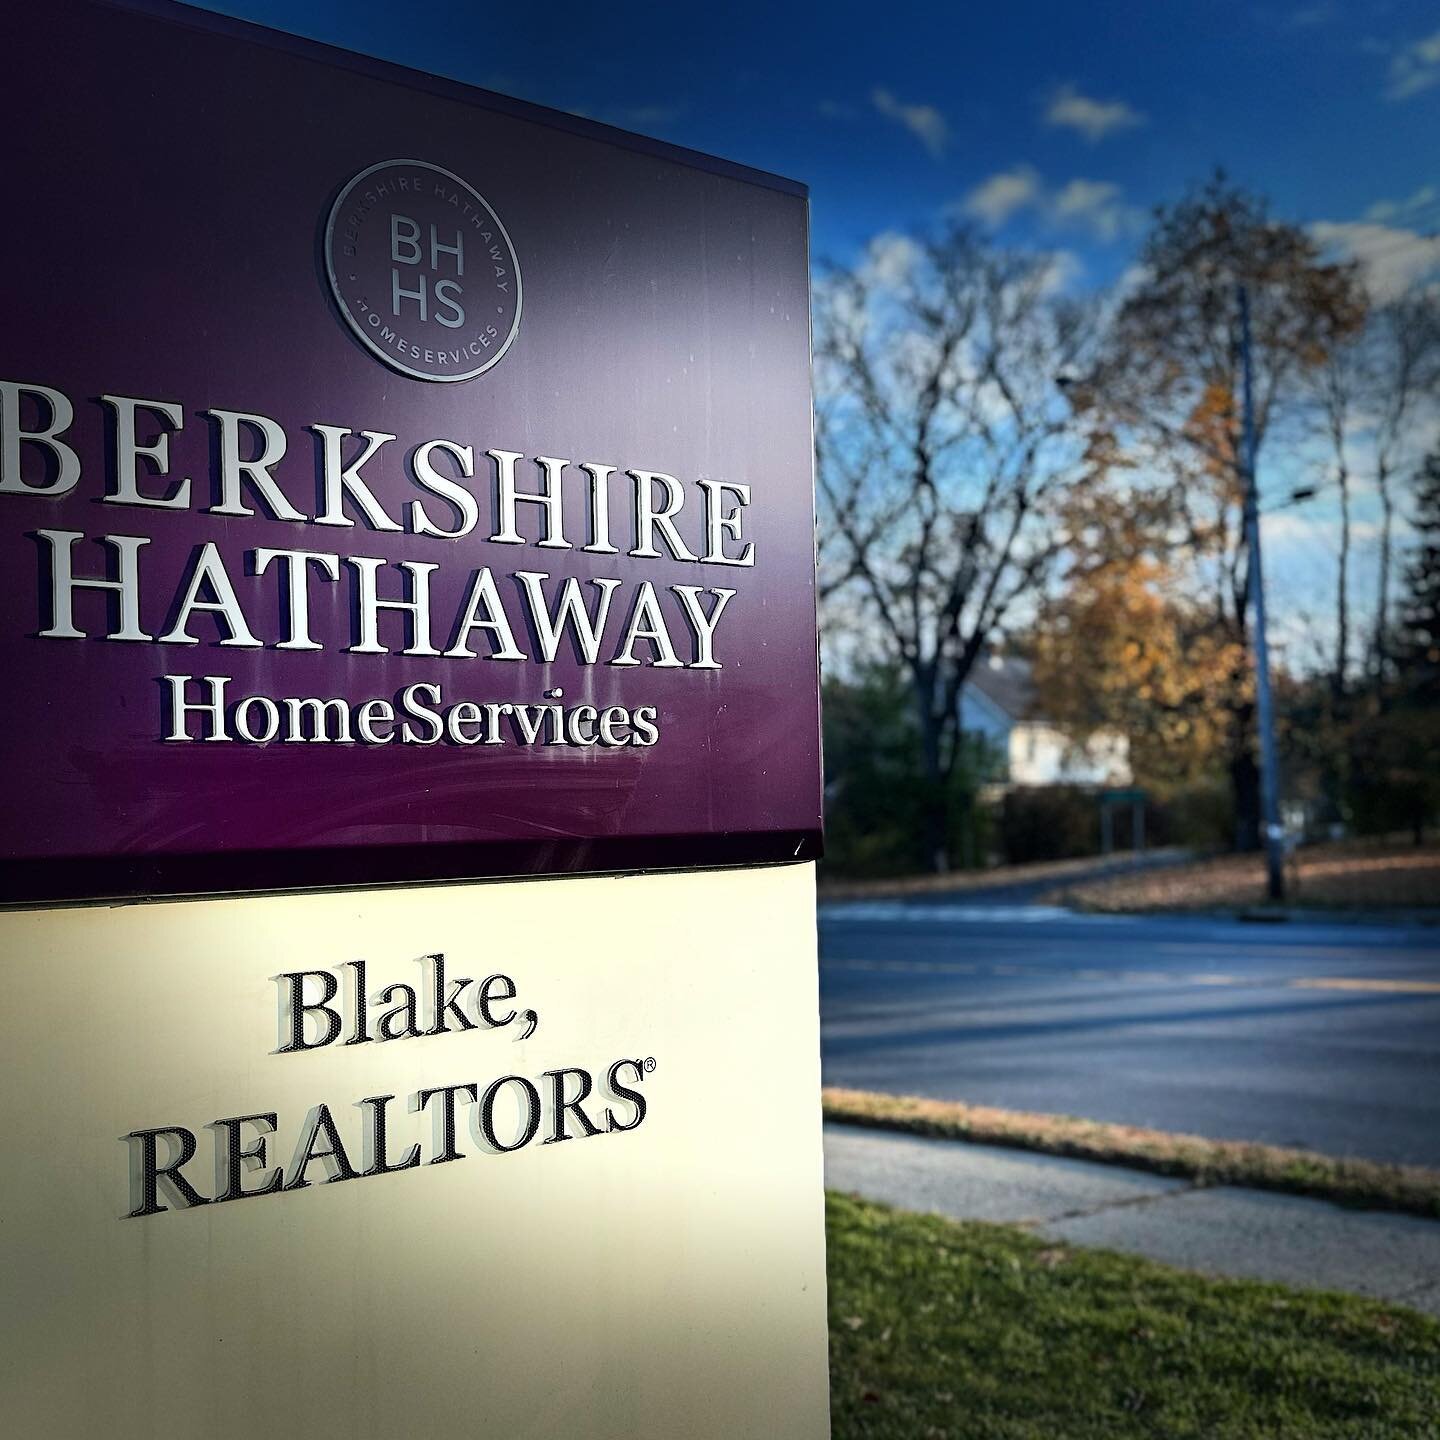 The sun sets on a beautiful #fall day in our #niskayuna office. #berkshirehathawayhomeservices #realtors